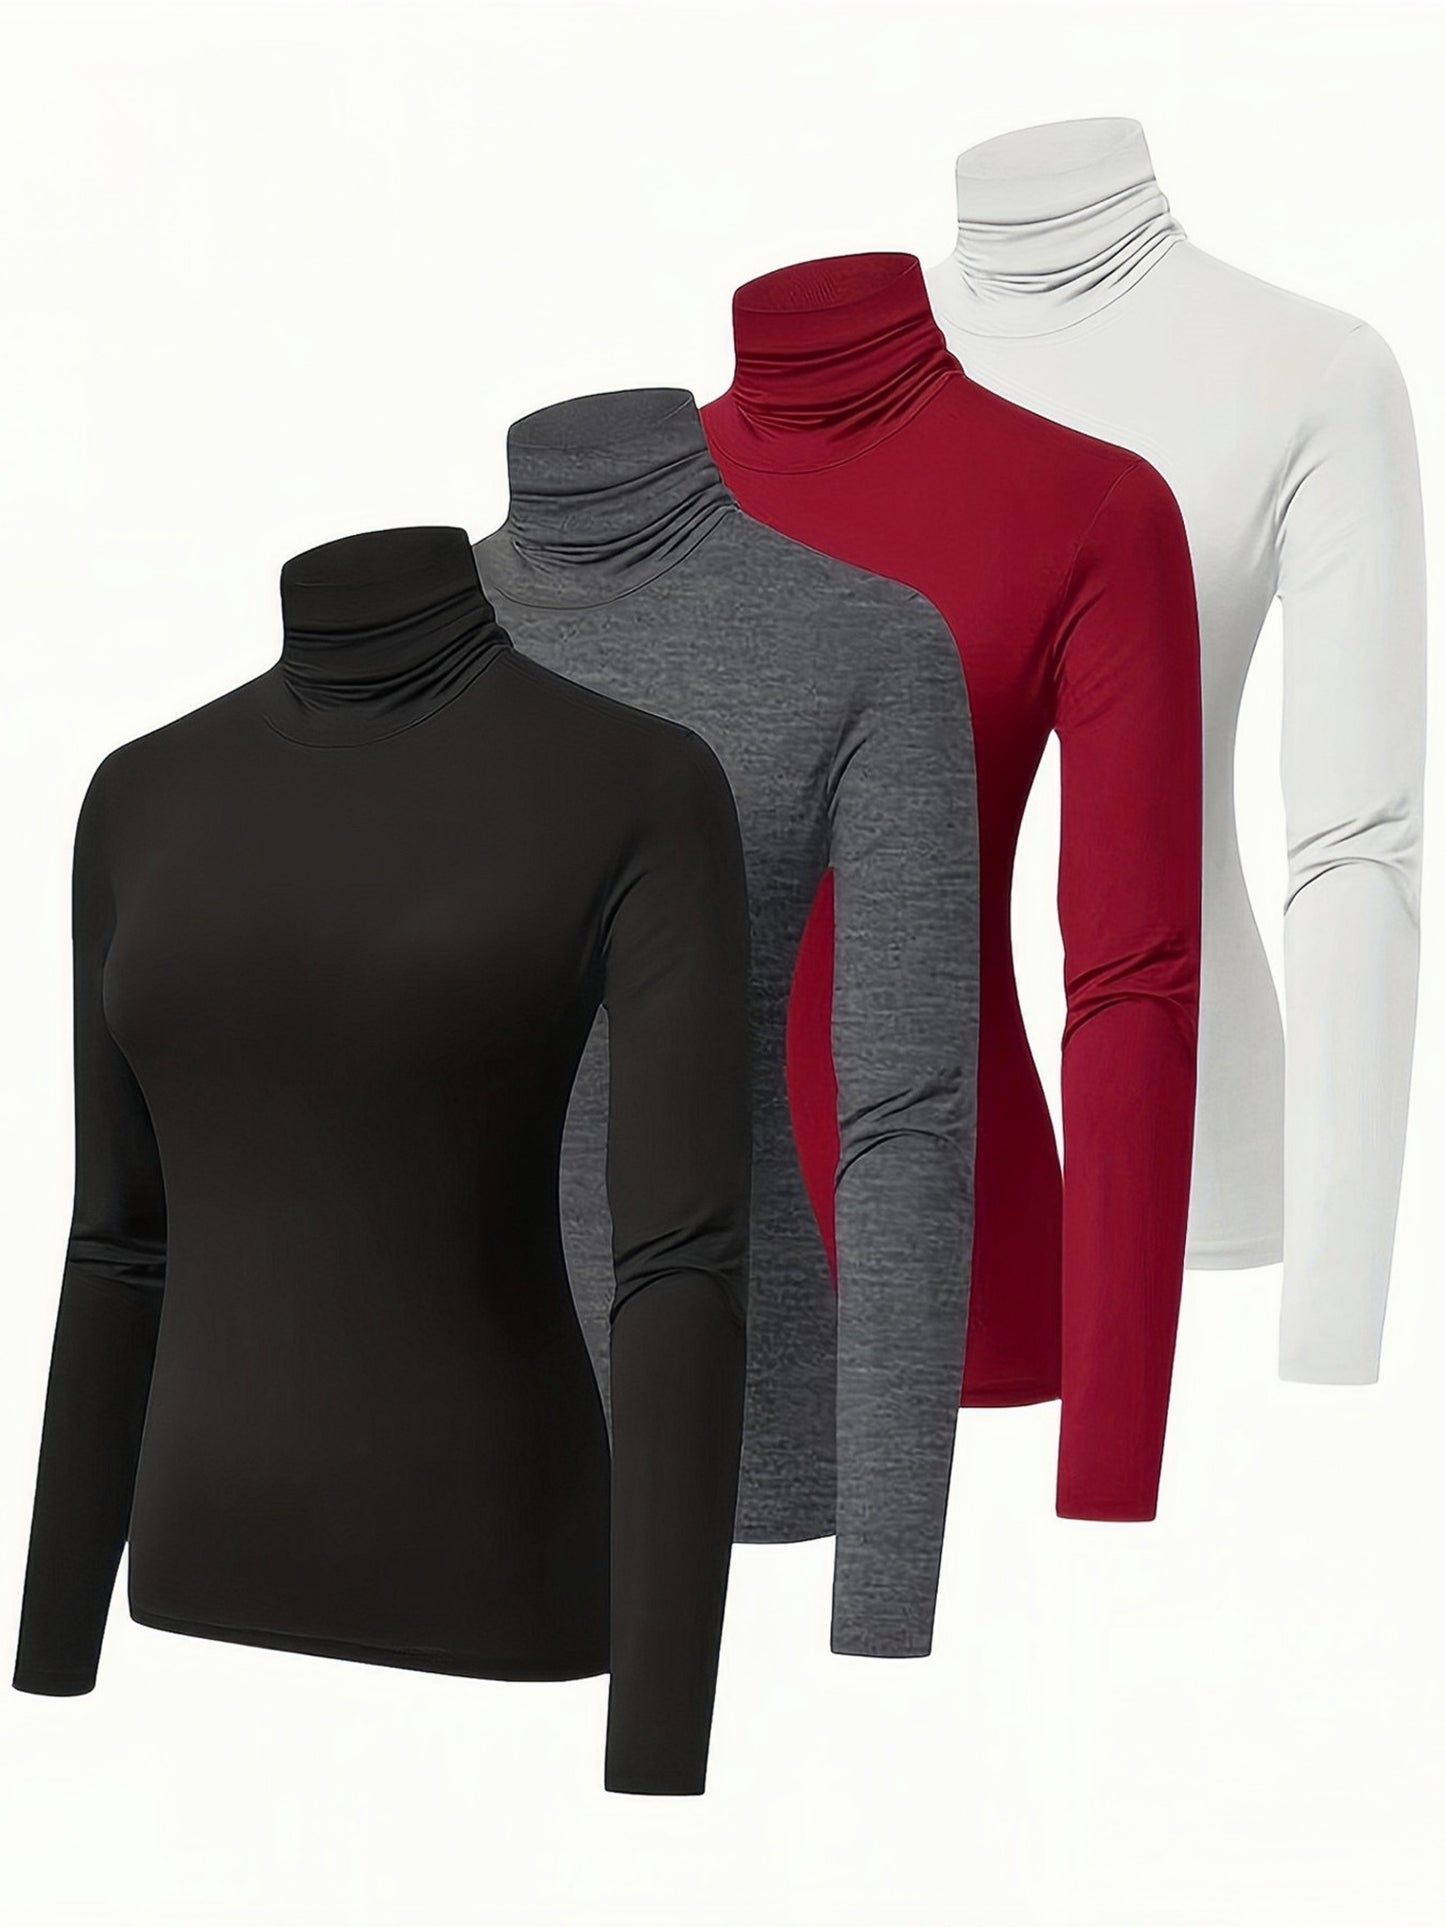 Solid 4 Packs T-shirt, Casual Long Sleeve Turtleneck T-shirt For Spring & Fall, Women's Clothing